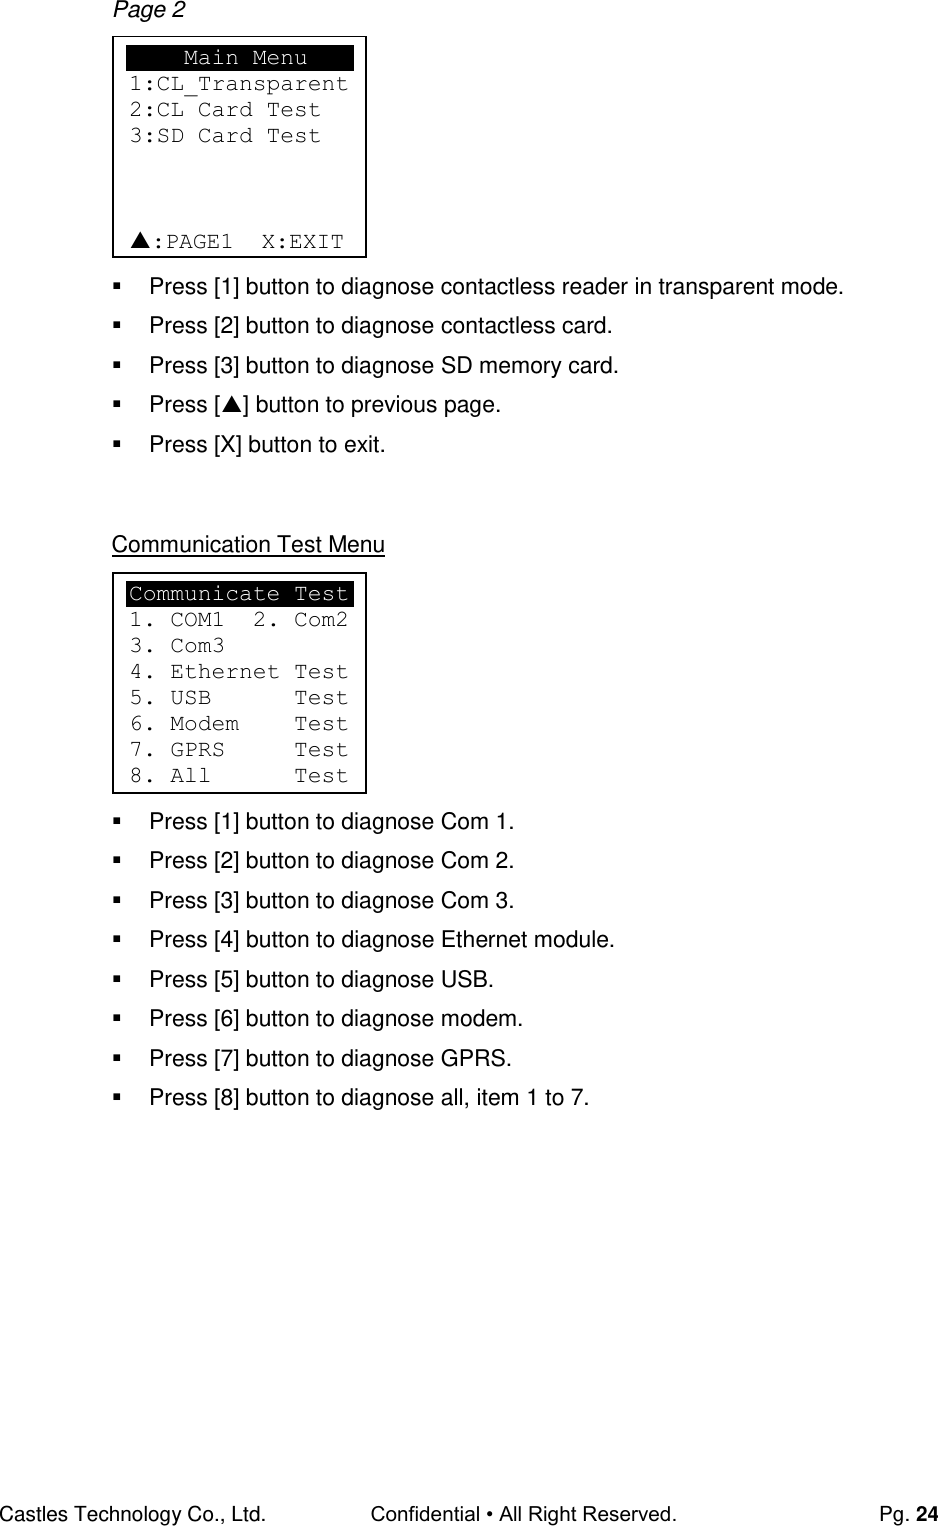 Castles Technology Co., Ltd. Confidential • All Right Reserved.  Pg. 24 Page 2         Press [1] button to diagnose contactless reader in transparent mode.   Press [2] button to diagnose contactless card.   Press [3] button to diagnose SD memory card.   Press [] button to previous page.   Press [X] button to exit.   Communication Test Menu         Press [1] button to diagnose Com 1.   Press [2] button to diagnose Com 2.   Press [3] button to diagnose Com 3.   Press [4] button to diagnose Ethernet module.   Press [5] button to diagnose USB.   Press [6] button to diagnose modem.   Press [7] button to diagnose GPRS.   Press [8] button to diagnose all, item 1 to 7.       Main Menu 1:CL_Transparent 2:CL Card Test 3:SD Card Test    :PAGE1  X:EXIT Communicate Test 1. COM1  2. Com2 3. Com3 4. Ethernet Test 5. USB      Test 6. Modem    Test 7. GPRS     Test 8. All      Test 